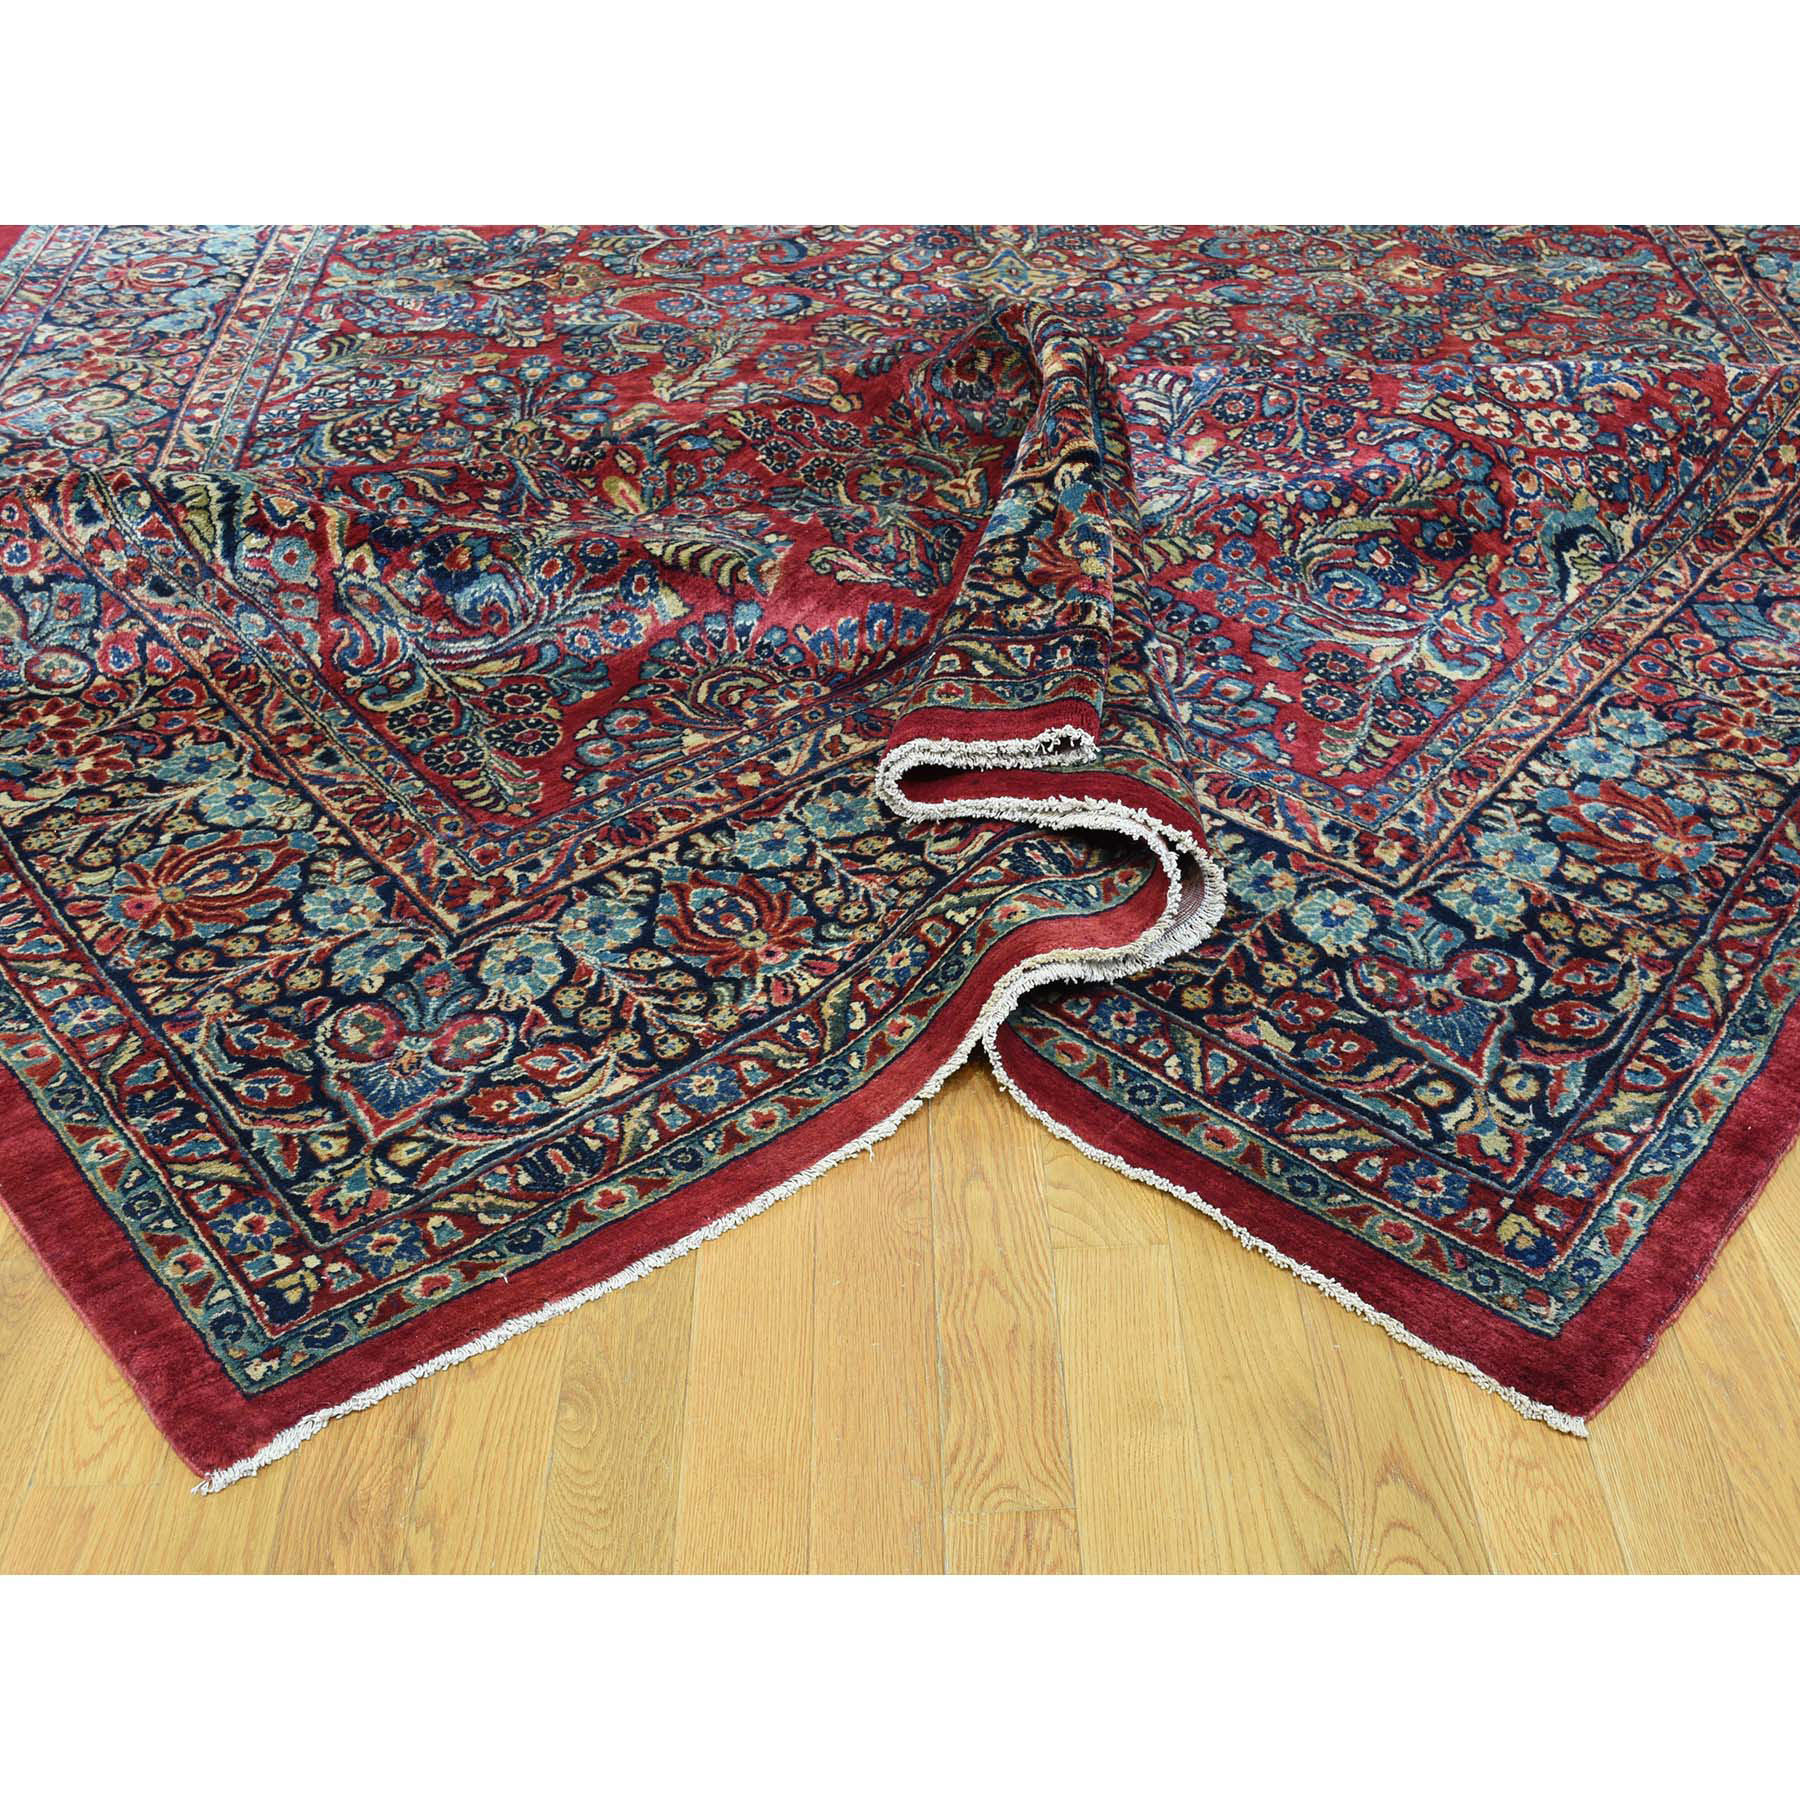 9'x25'7" Hand Woven Antique Persian Sarouk Gallery Size Exc Cond Rug 